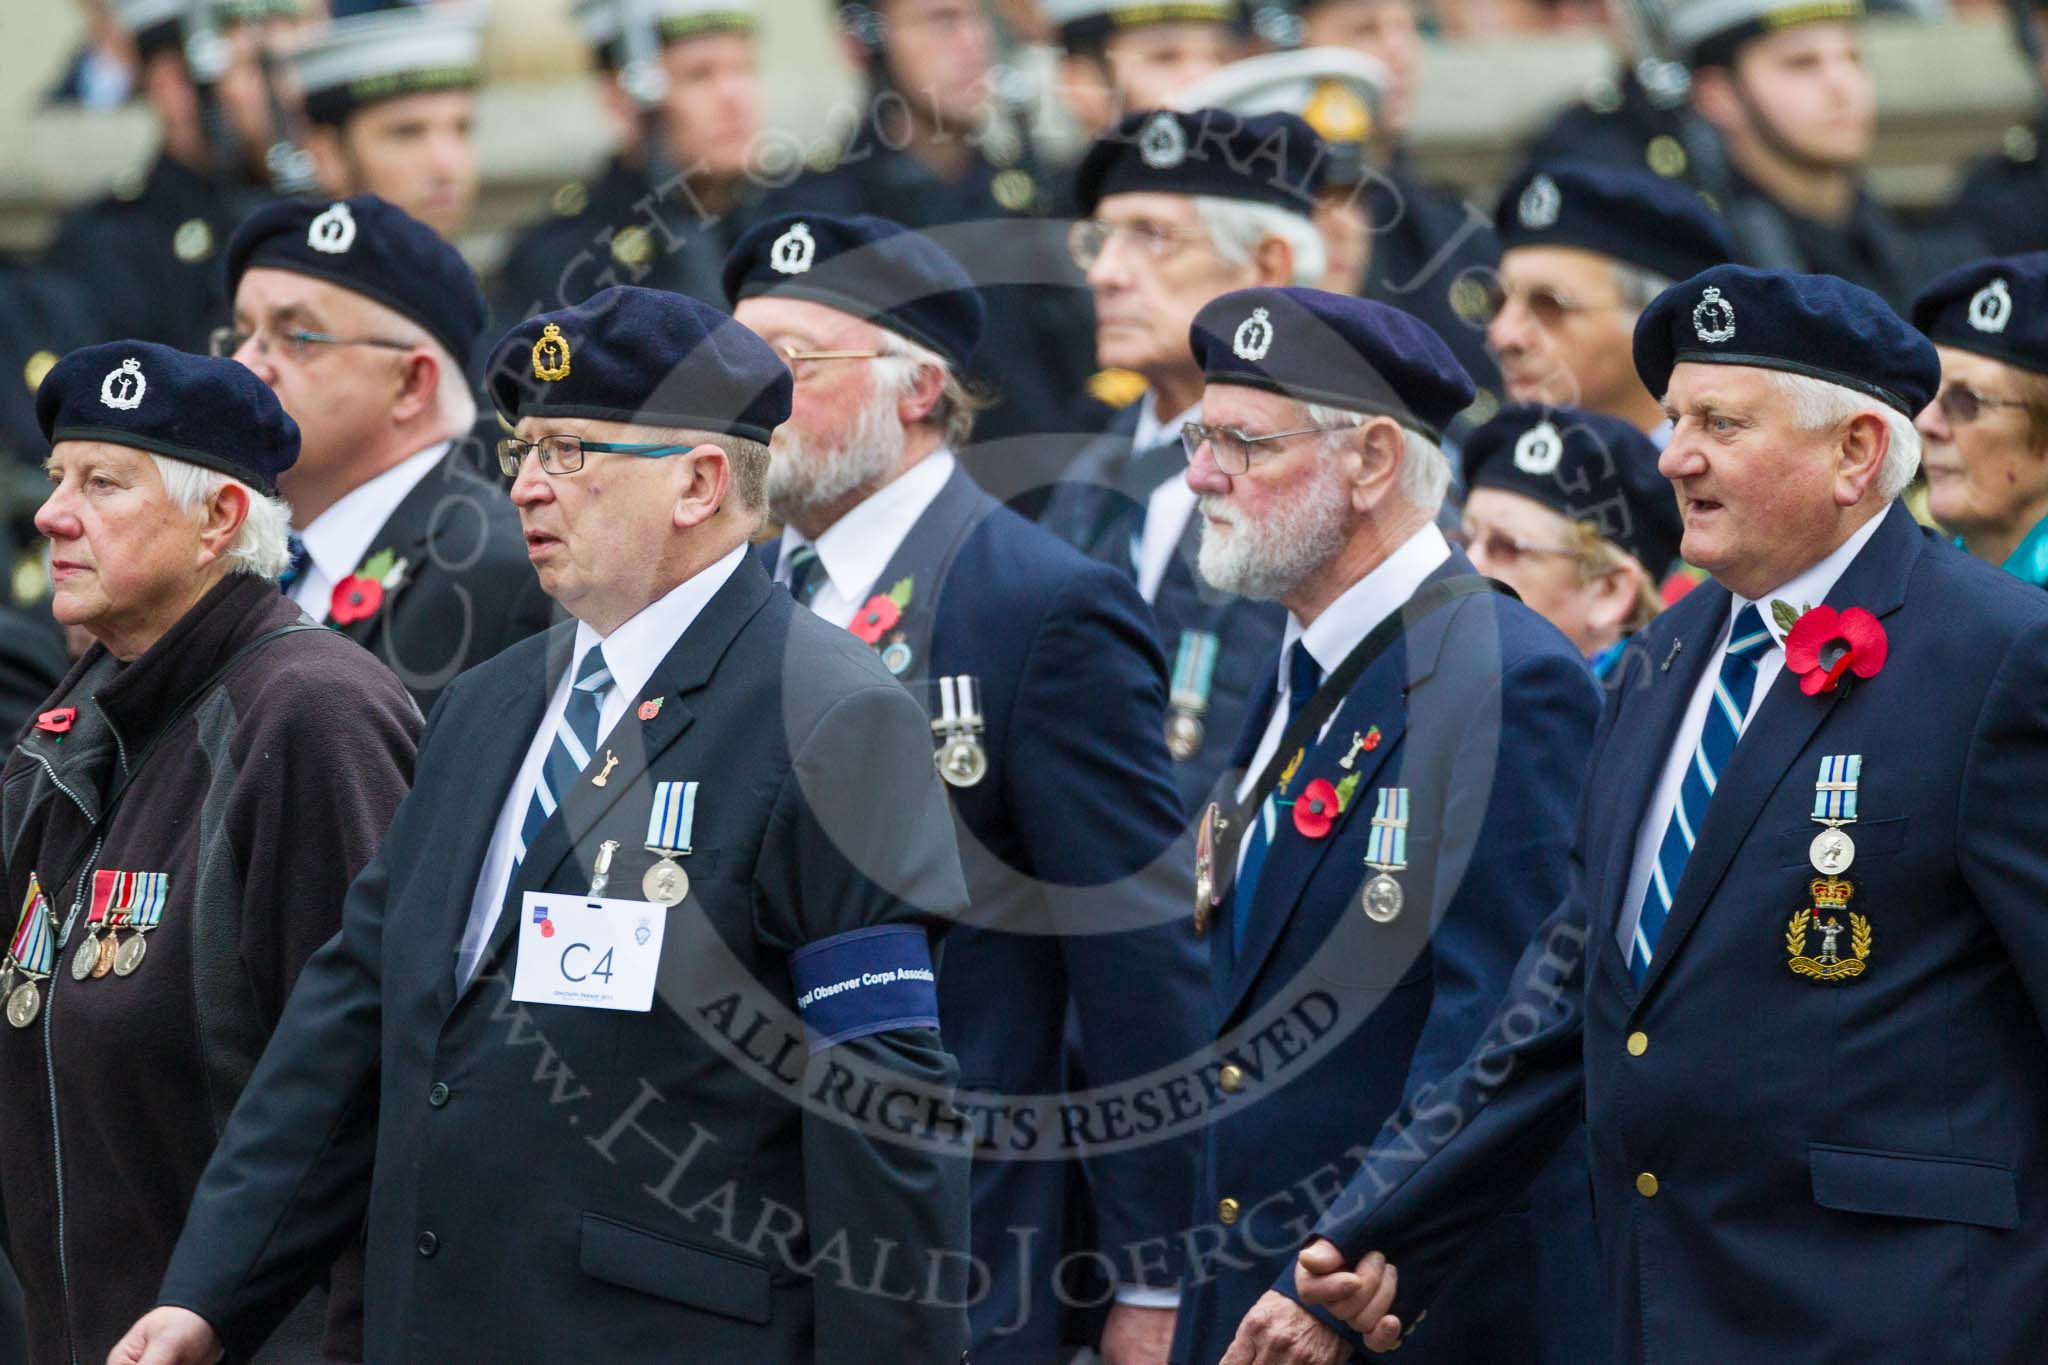 Remembrance Sunday at the Cenotaph 2015: Group C4, Royal Observer Corps Association (Anniversary).
Cenotaph, Whitehall, London SW1,
London,
Greater London,
United Kingdom,
on 08 November 2015 at 11:47, image #444